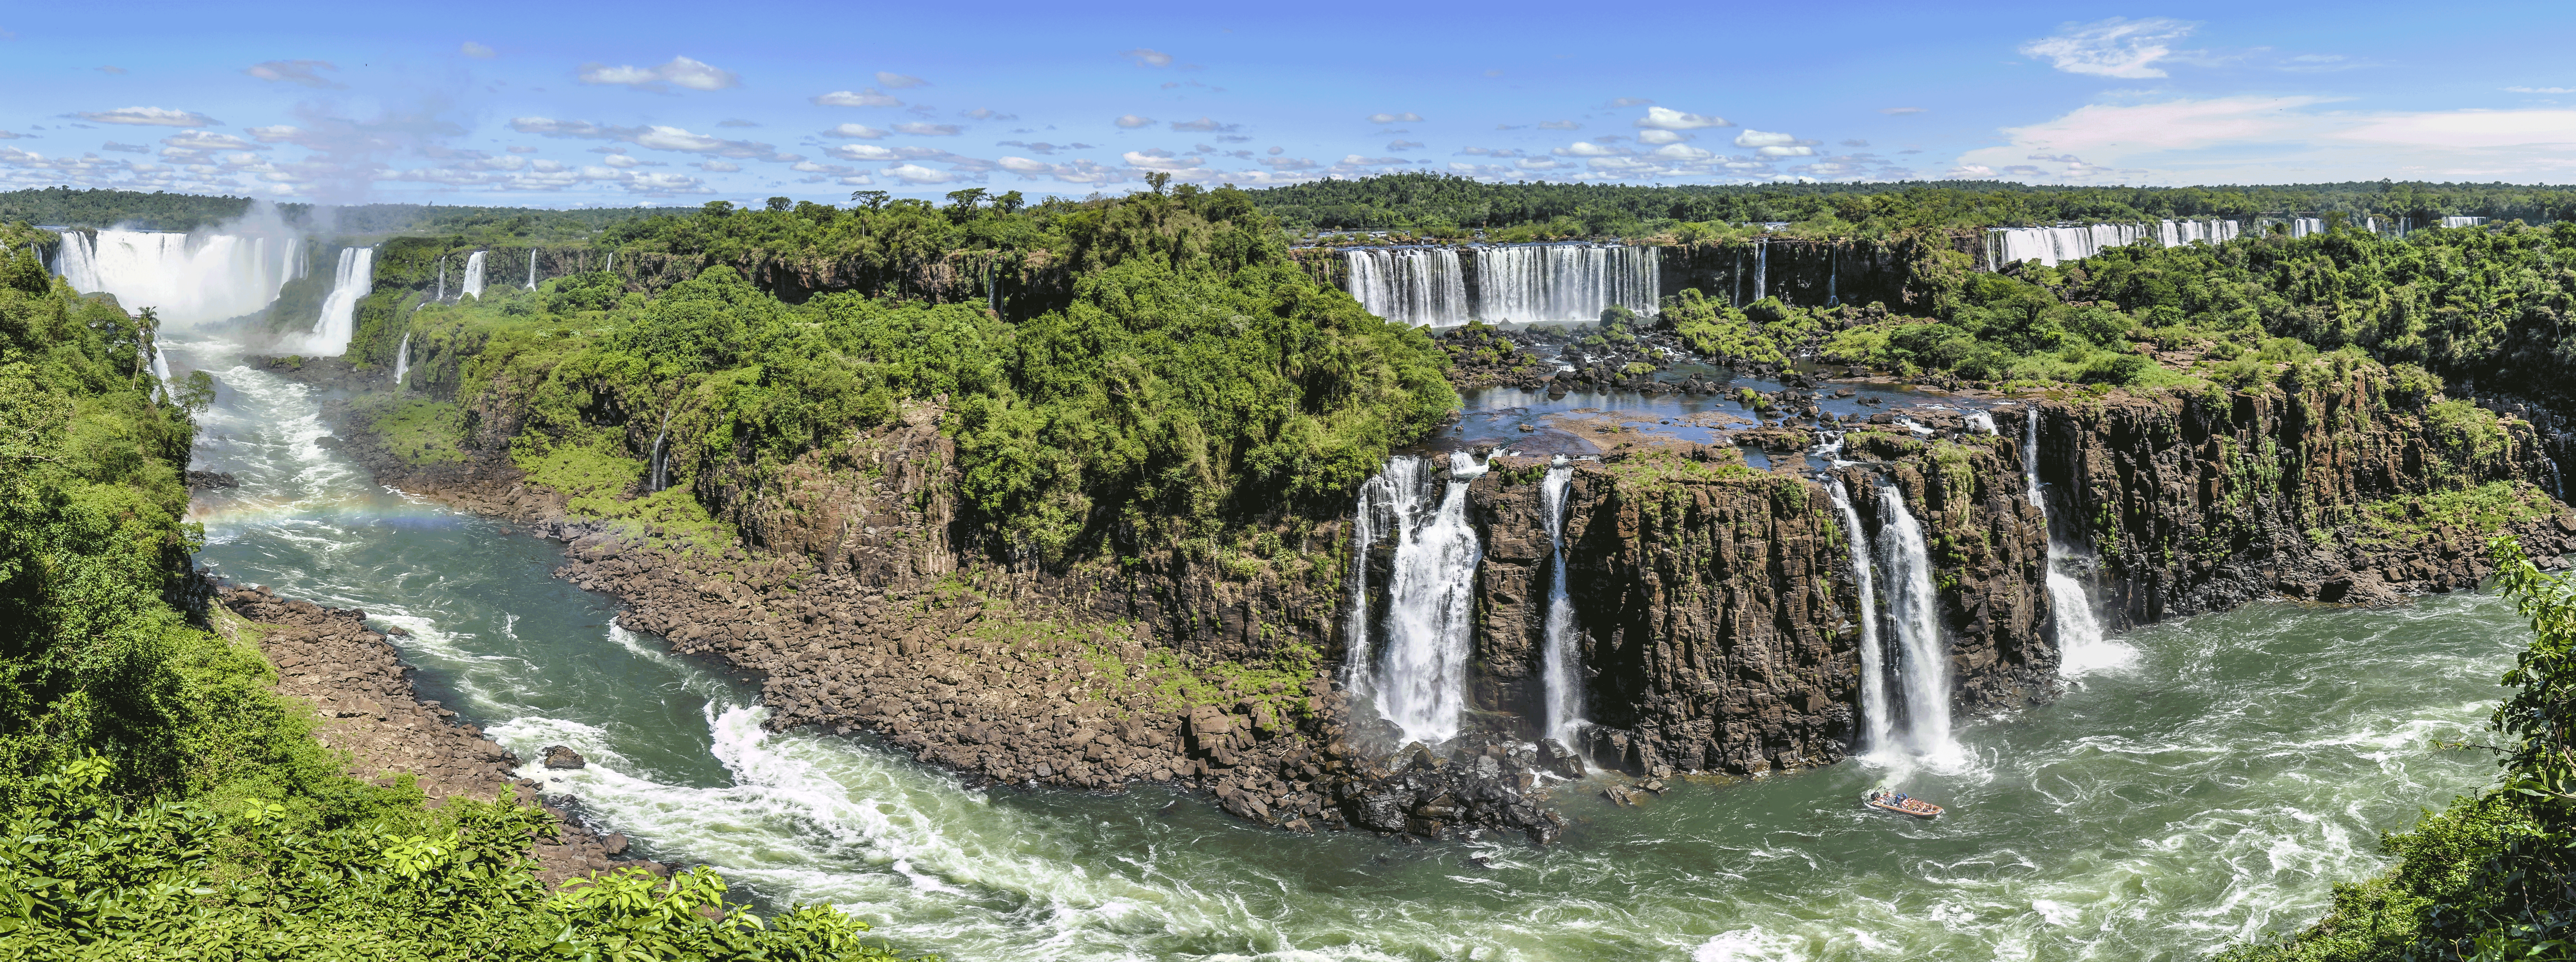 /resource/Images/southamerica/argentina/headerimage/Iguazu-falls-view-from-Argentina2.png